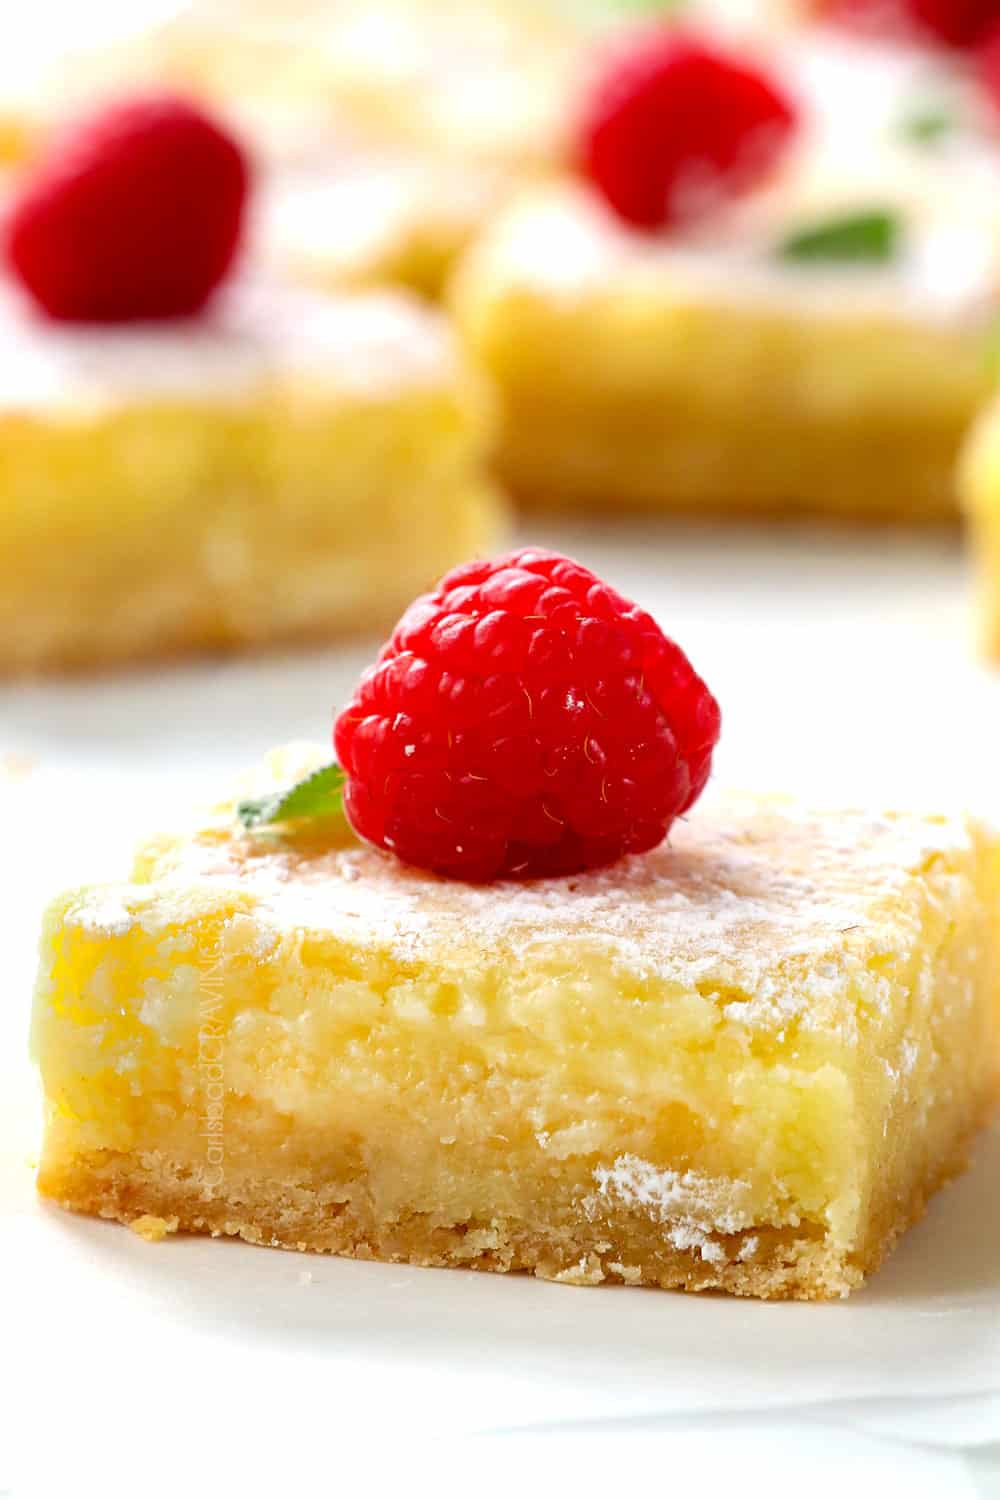 up close of a slice of Ooey Gooey Butter Cake showing how gooey it is